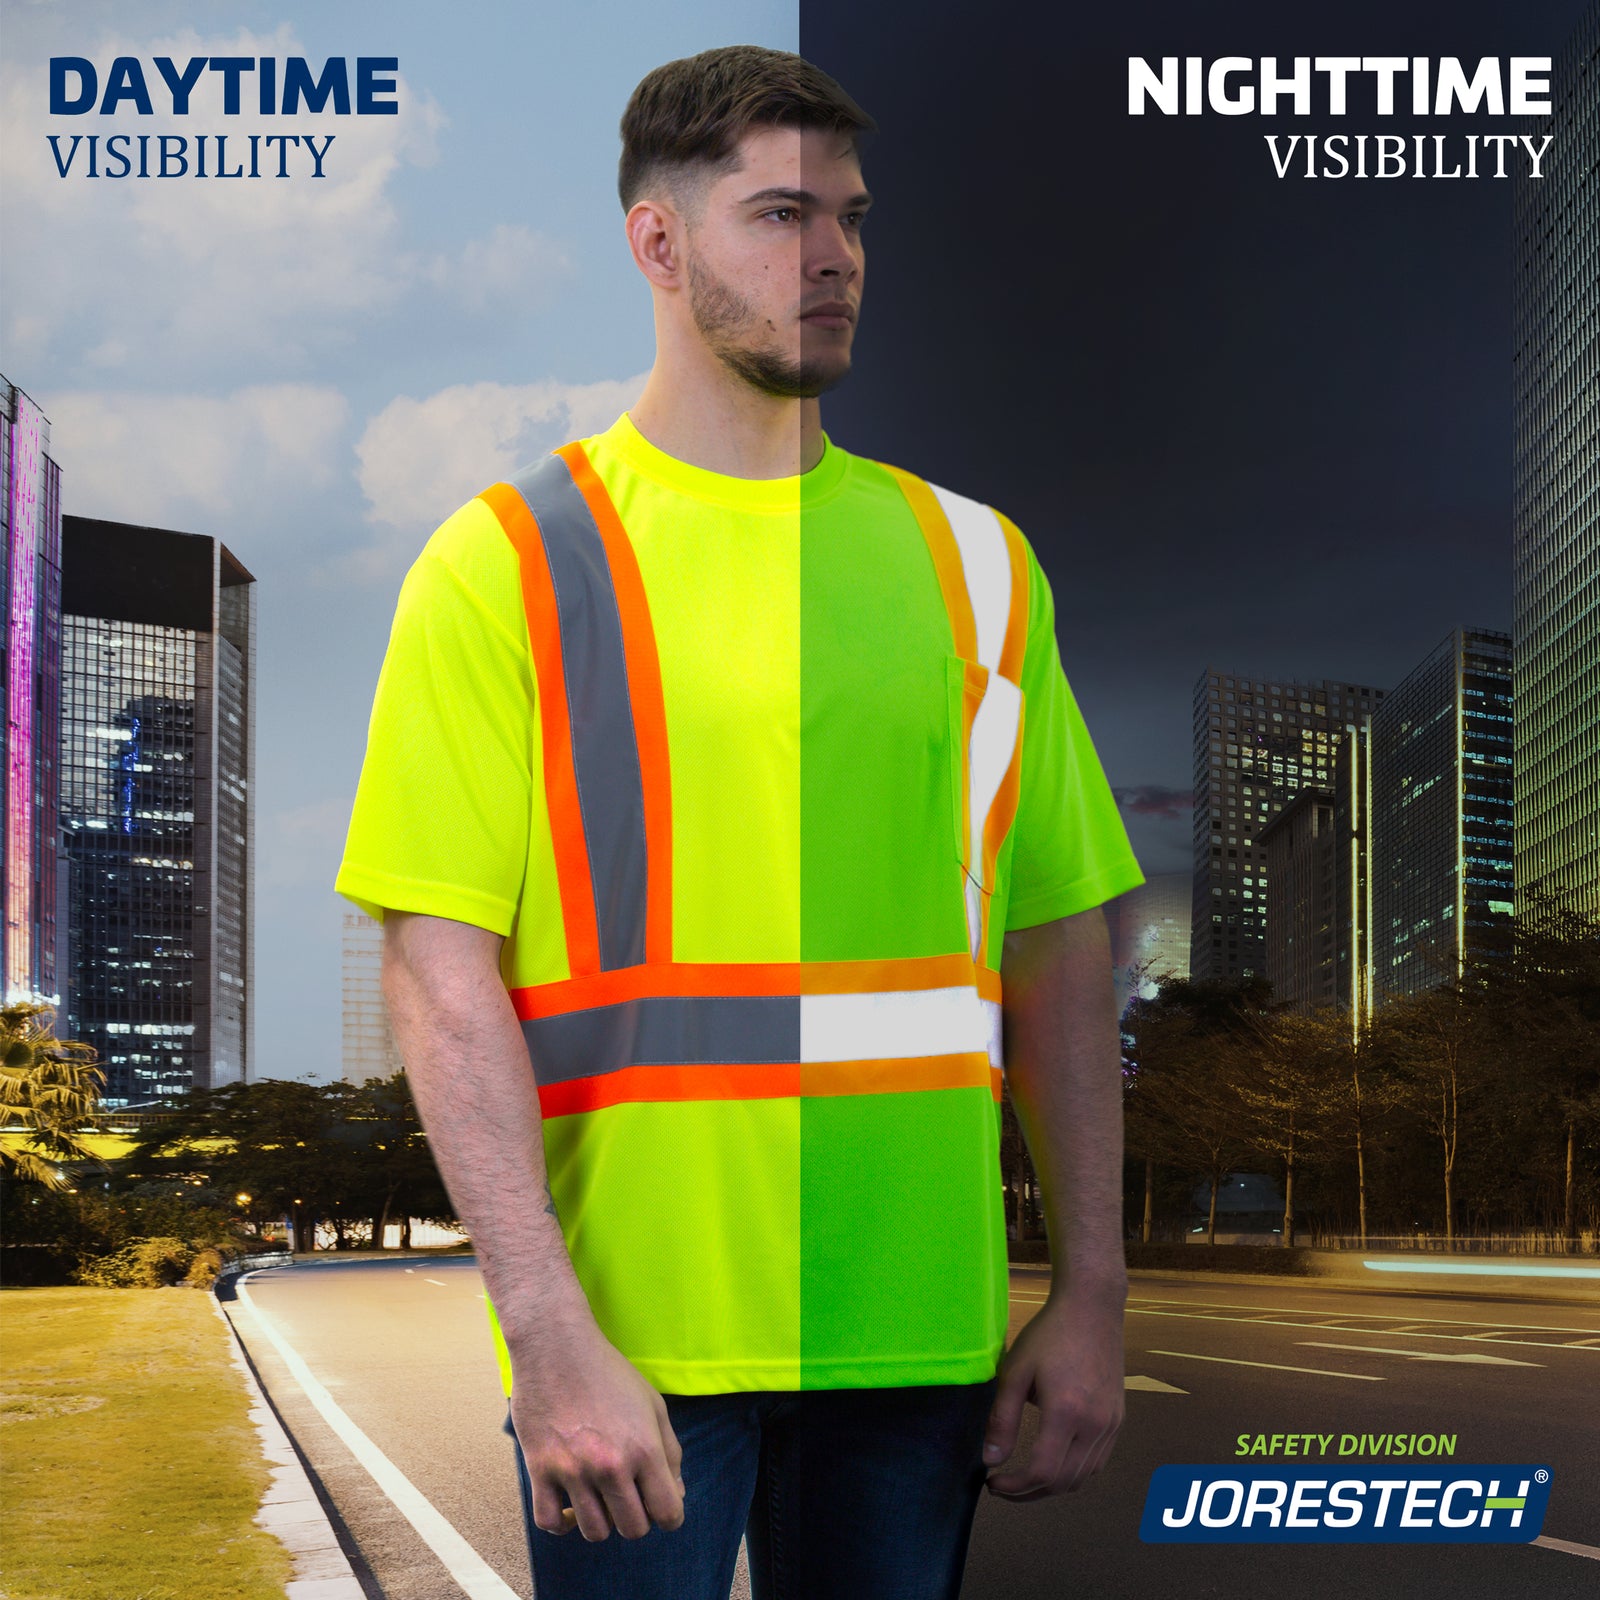 Worker standing on a road while wearing the Lime reflective shirt in a daytime and a nighttime background to show reflectivity